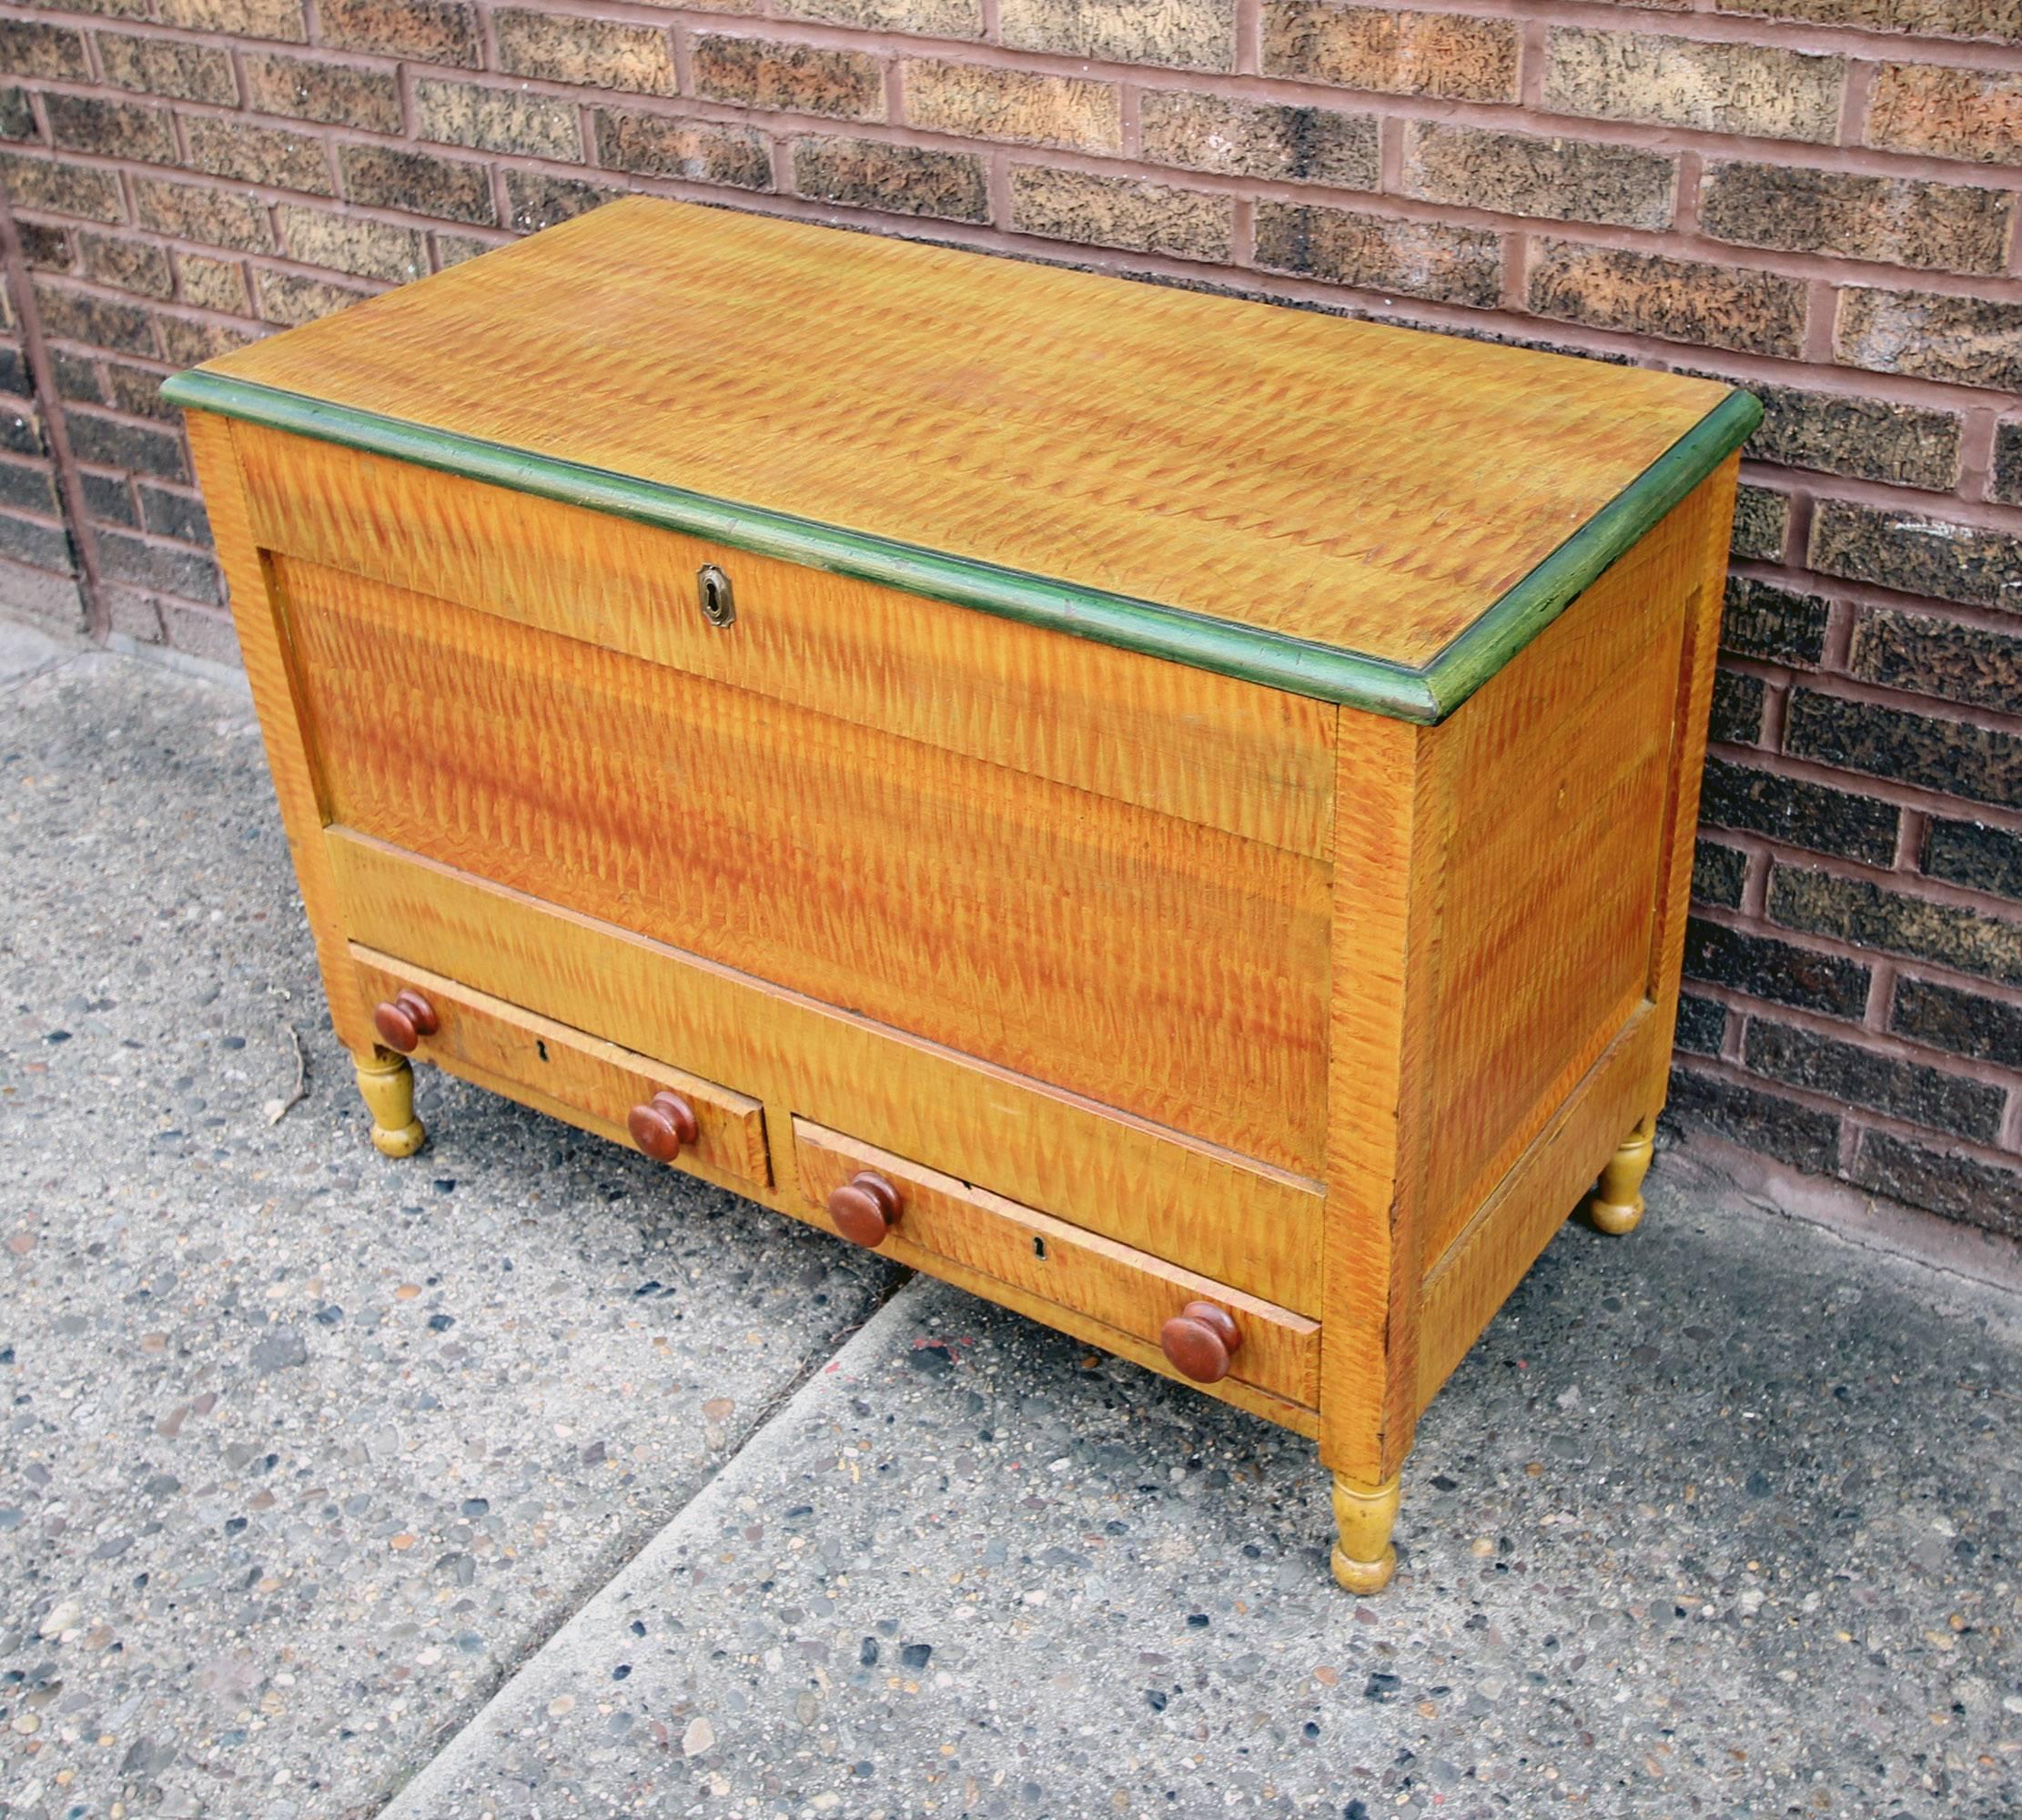 Excellent grain painted blanket chest with two dovetailed drawers, turned feet and green painted edge. Inside there's a till with a beautiful walnut lid. All original.